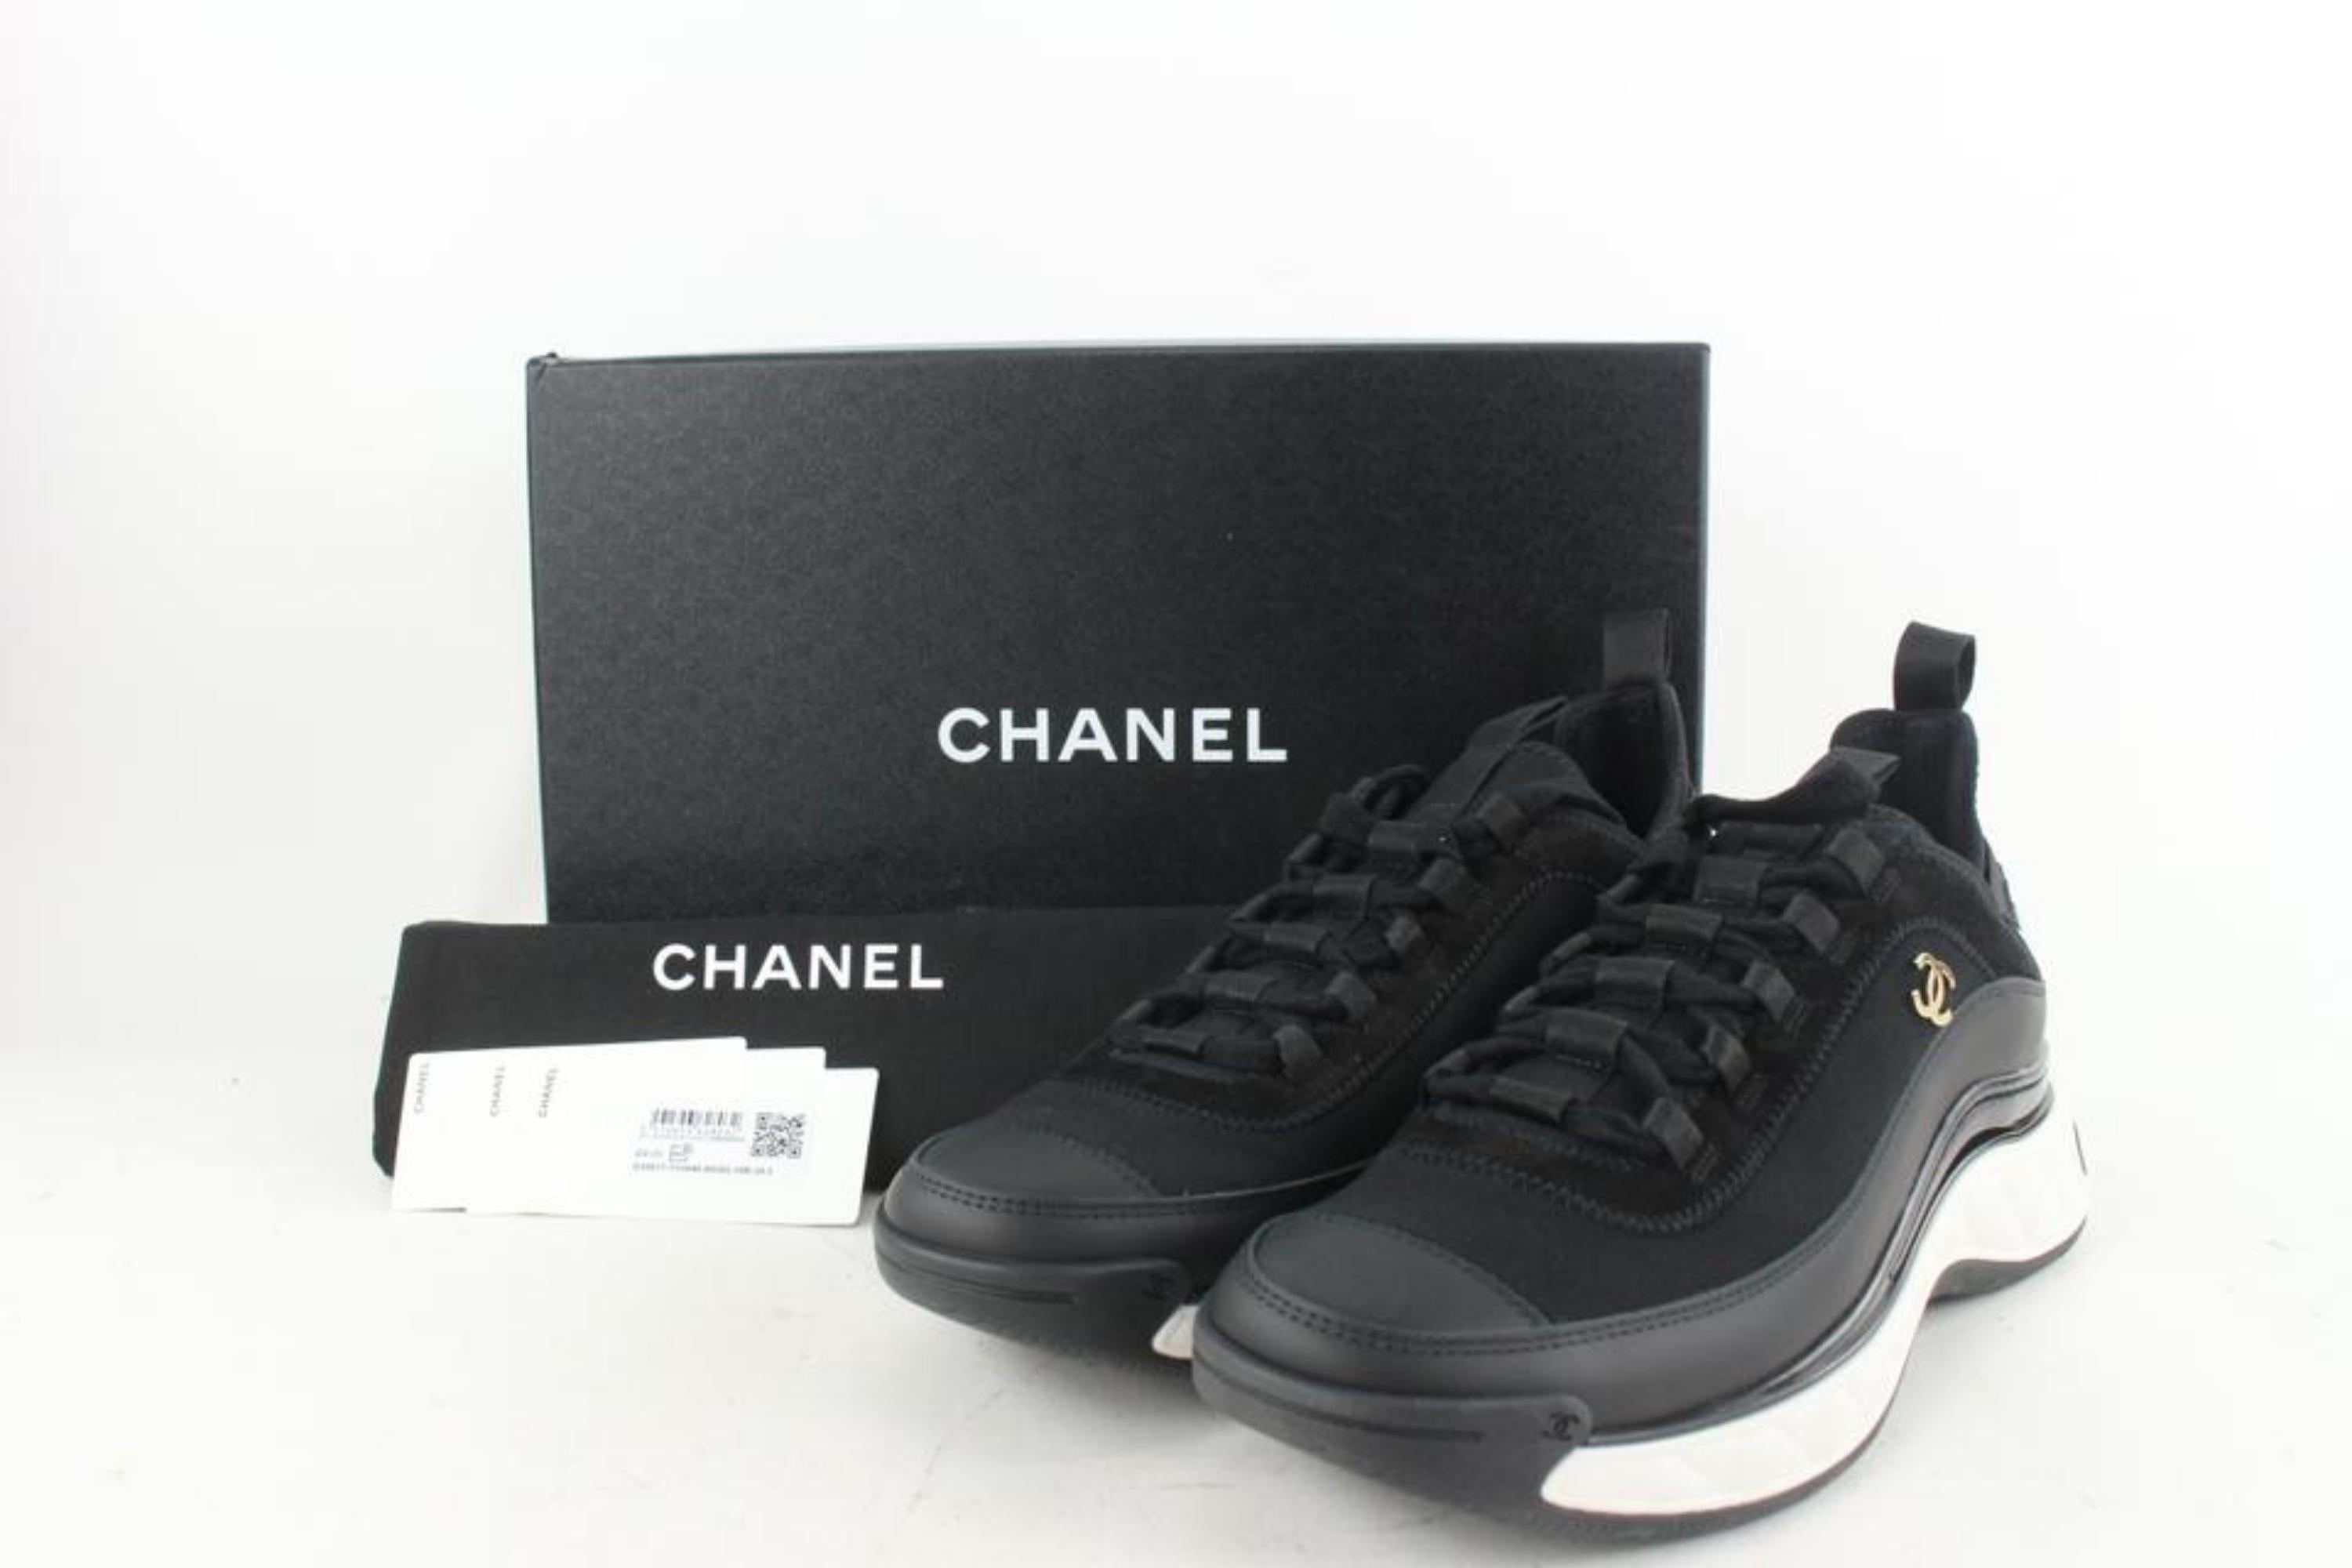 Chanel Size 39.5 Bubble Quilted Black CC Trainer Sneaker G35617 9CC4
Date Code/Serial Number: G35617
Made In: Italy
Measurements: Length:  12